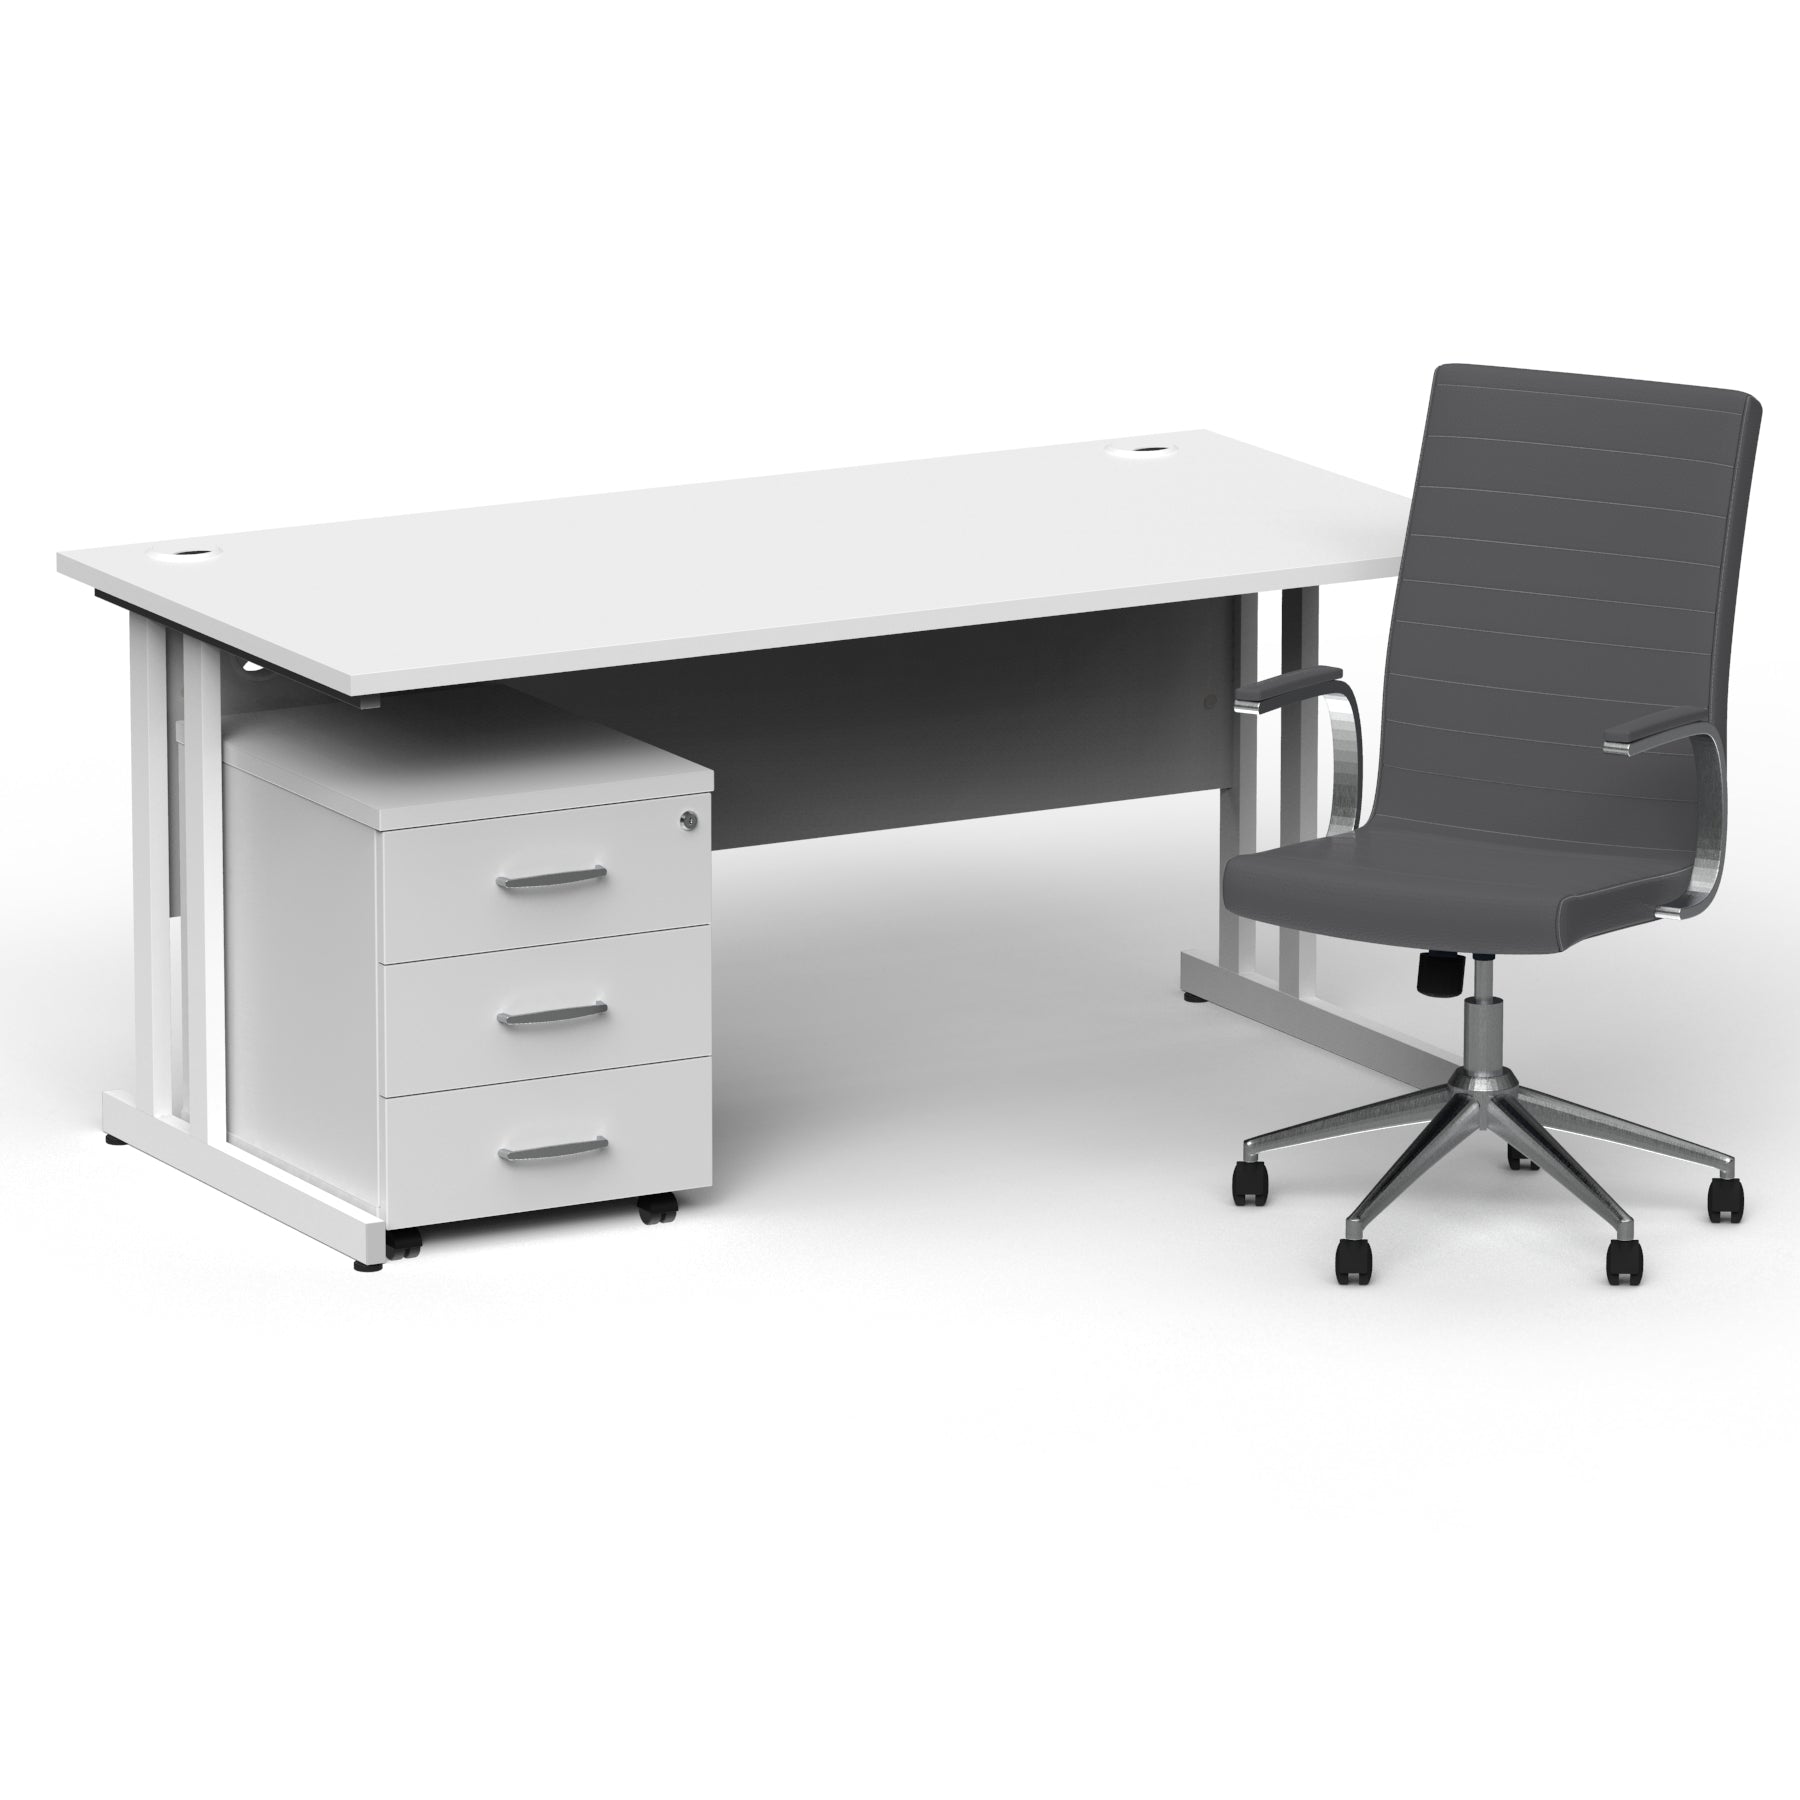 Impulse 1600mm Cantilever Straight Desk & Mobile Pedestal with Ezra Grey Executive Chair - 5-Year Furniture Guarantee, 2-Year Seating Warranty